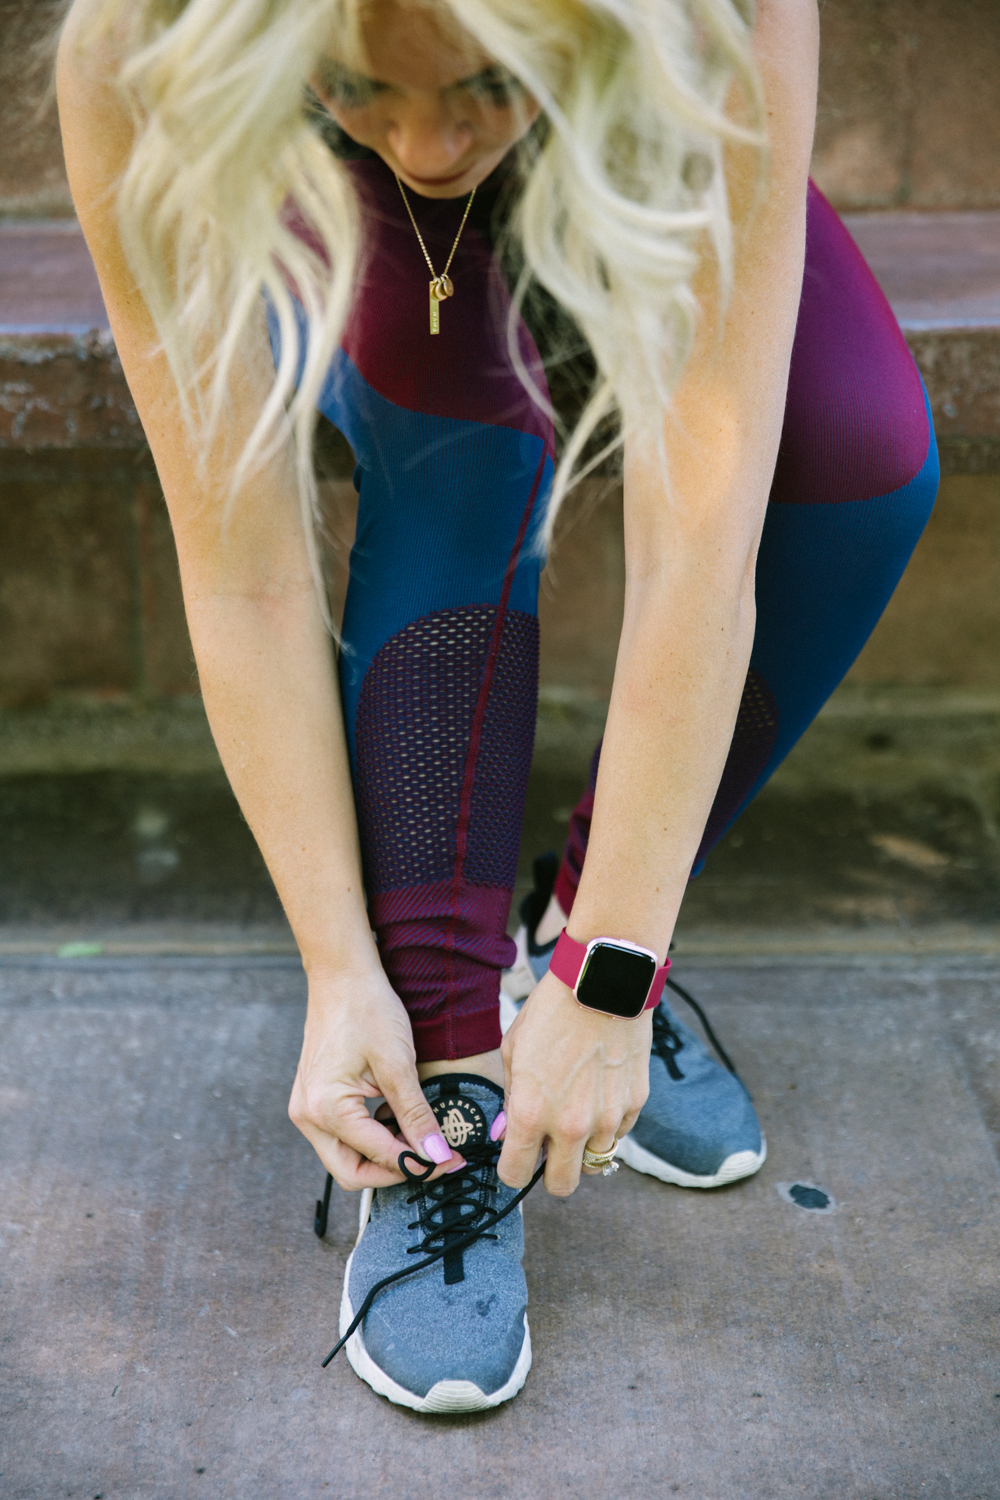 How to stay Fit with FitBit Versa by popular Las Vegas lifestyle blog, Life of a Sister